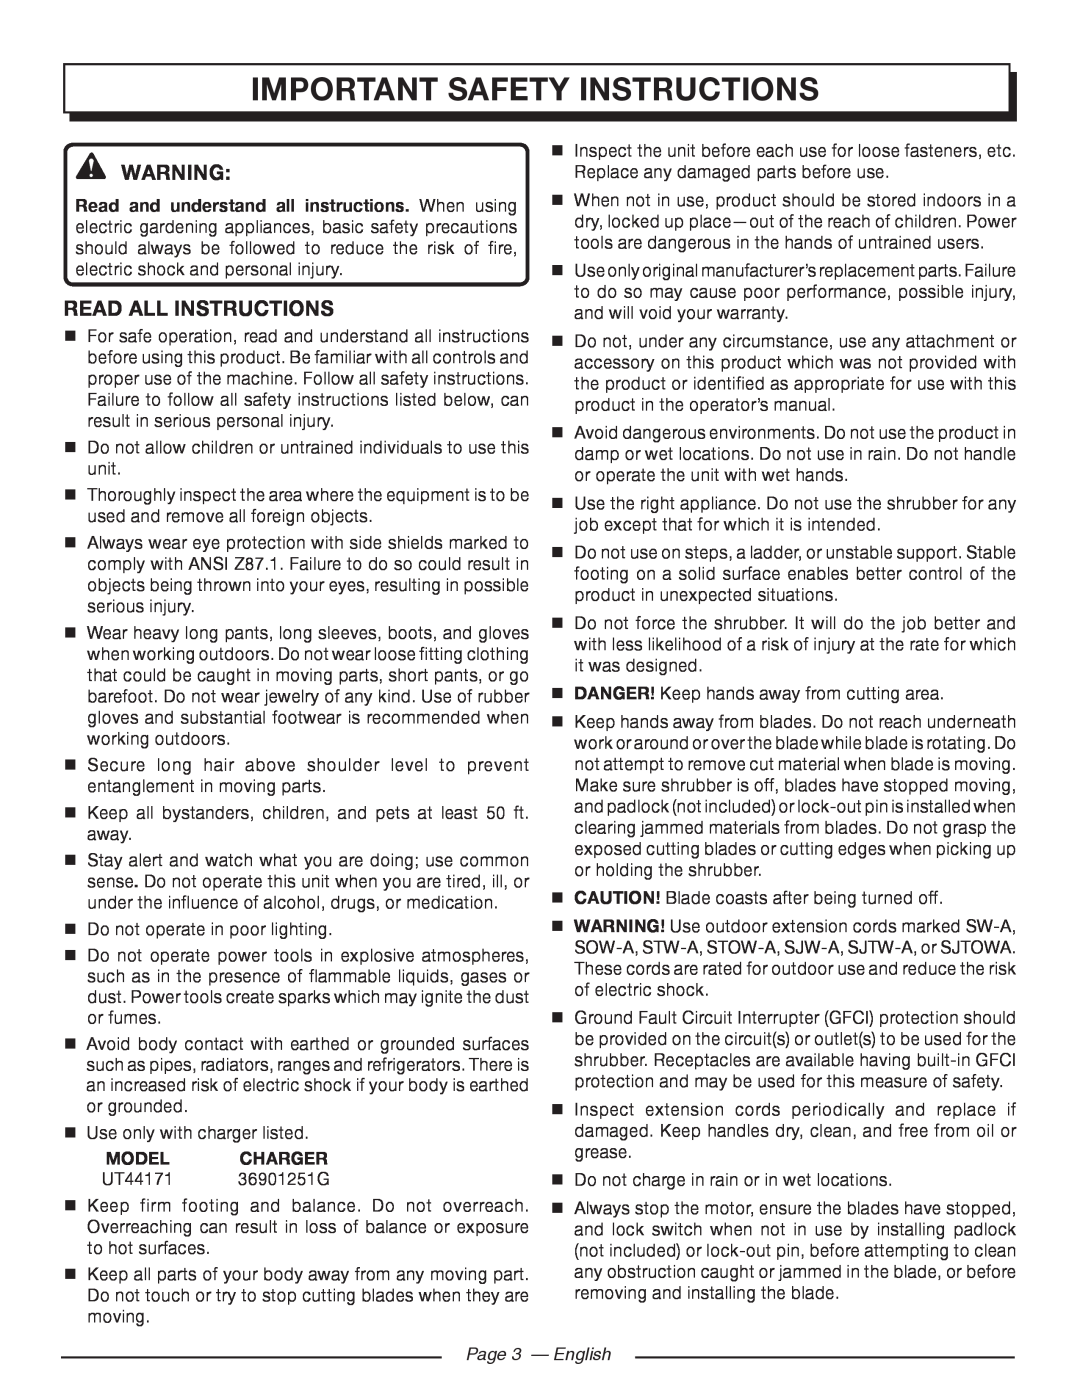 Homelite UT44171 manuel dutilisation important safety instructions, read all instructions, Model Charger, Page 3 - English 